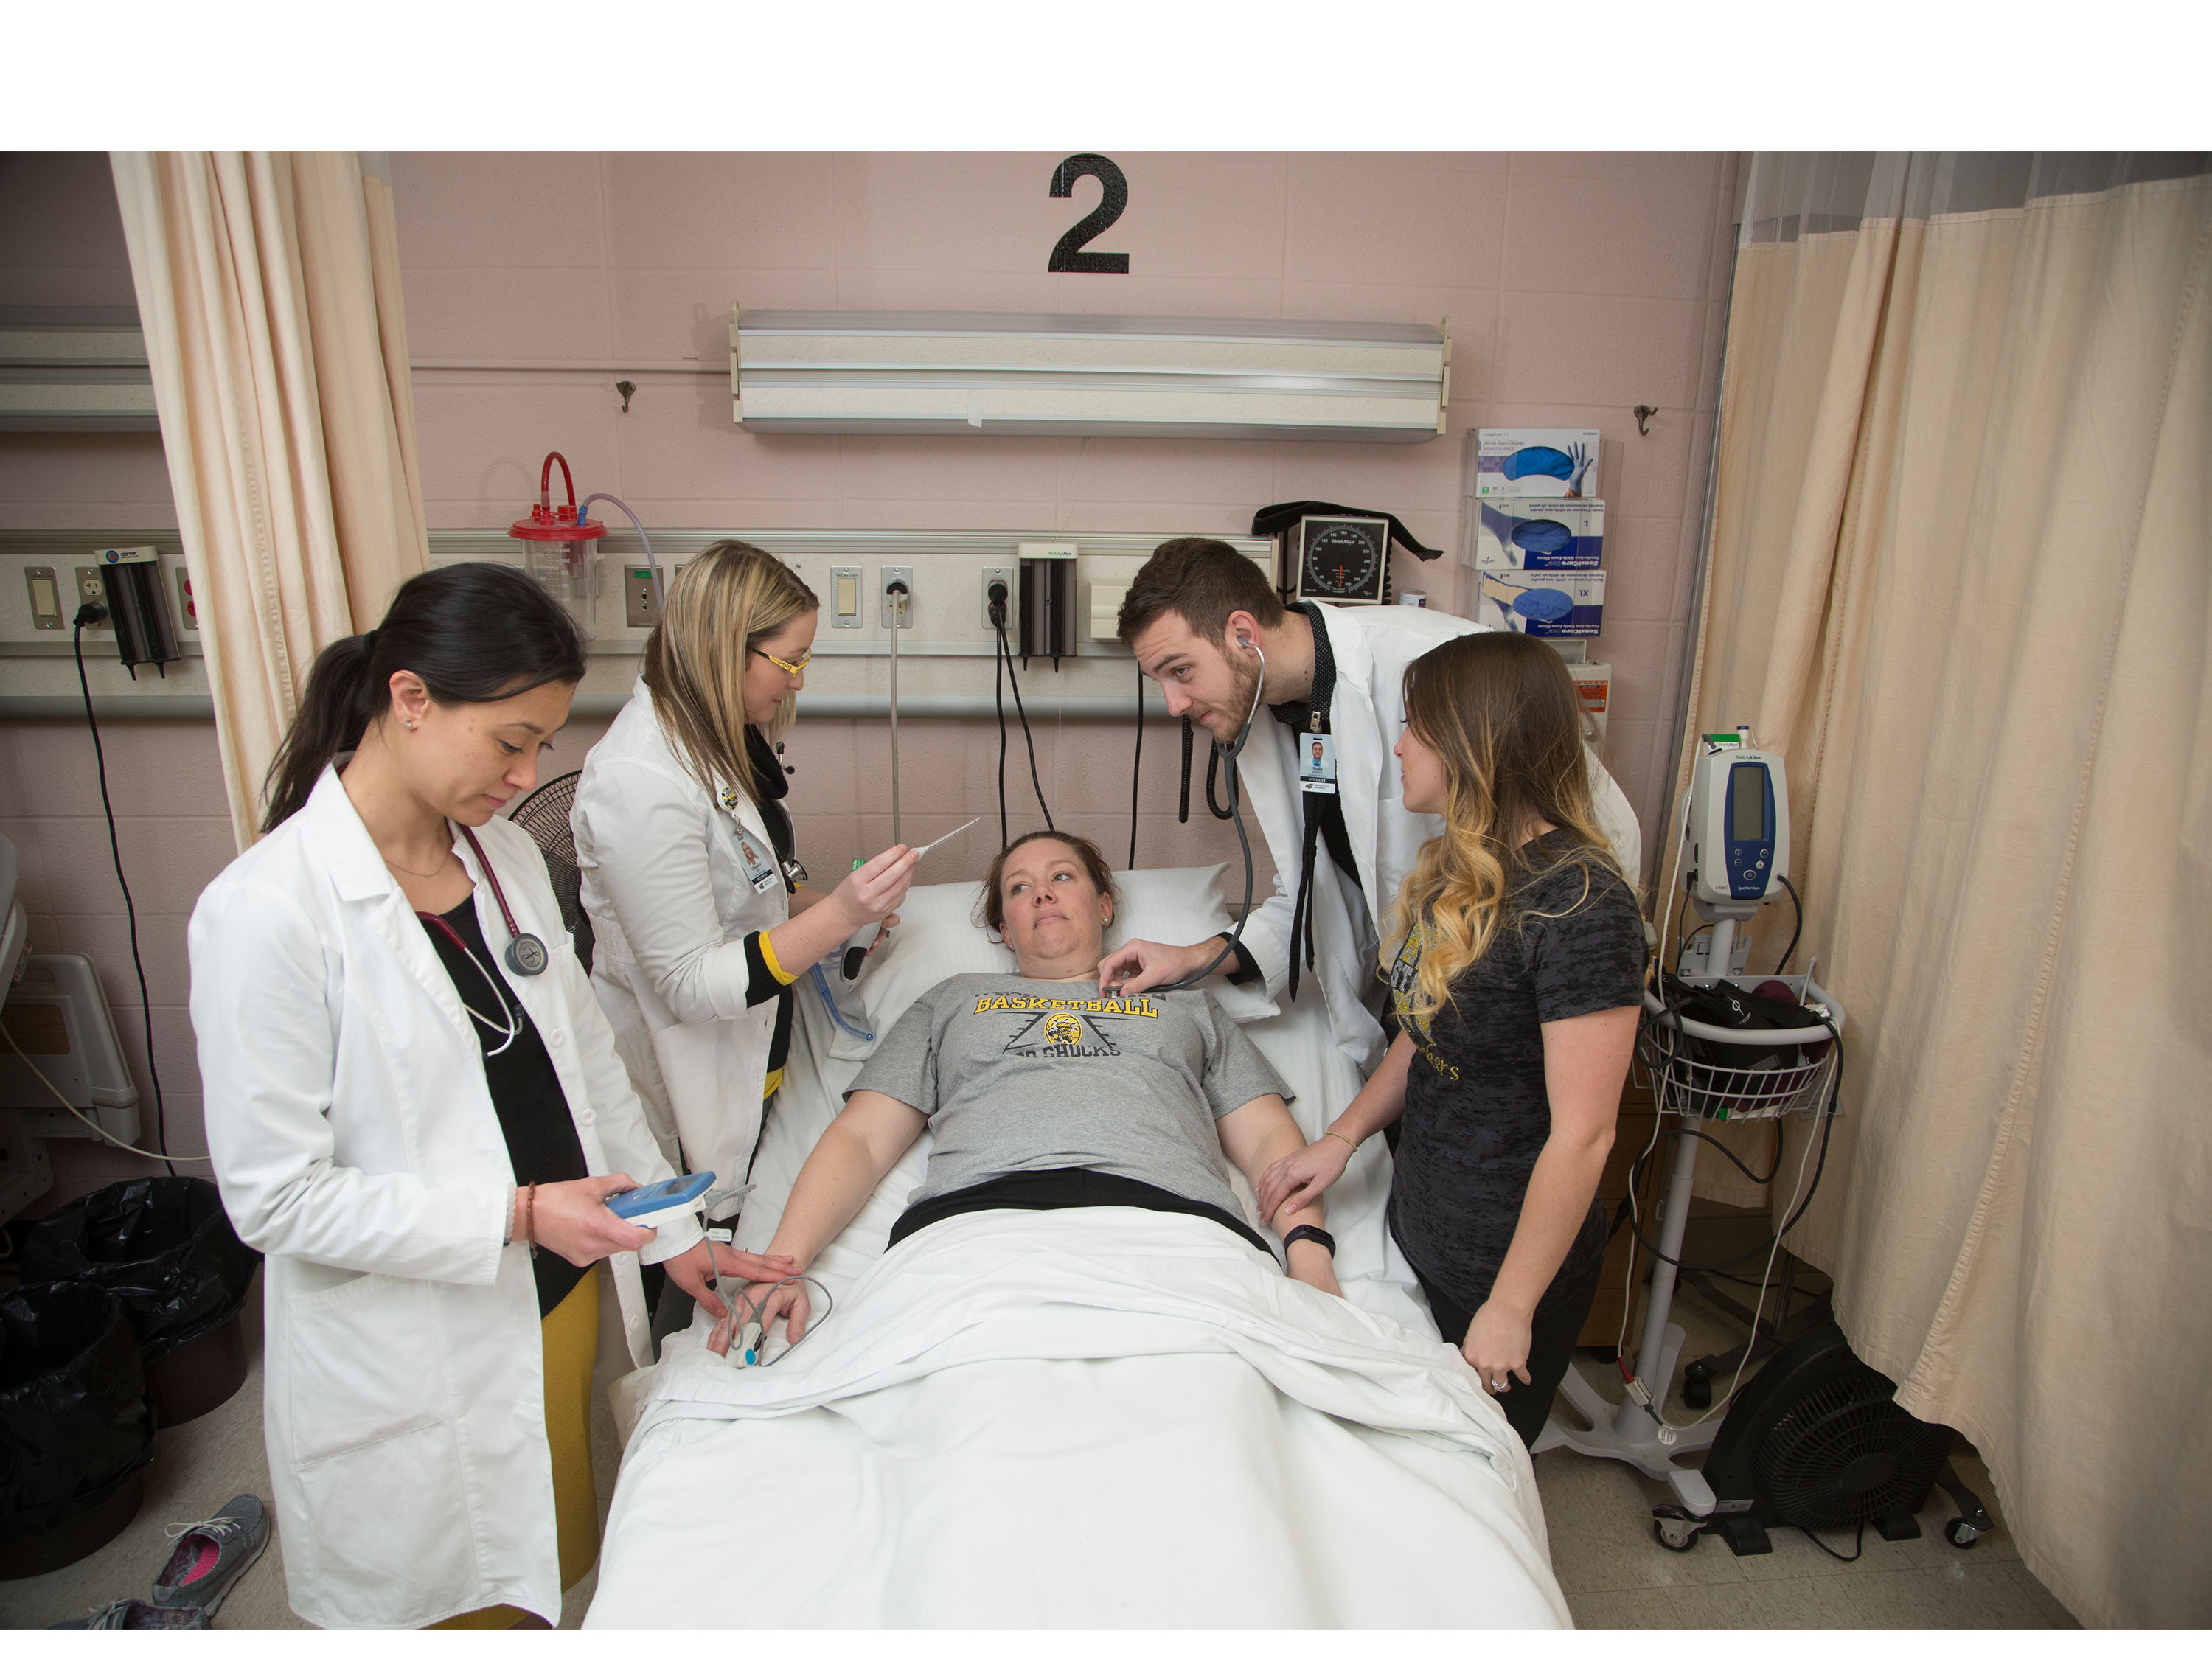 Nursing students exam a patient at bedside.